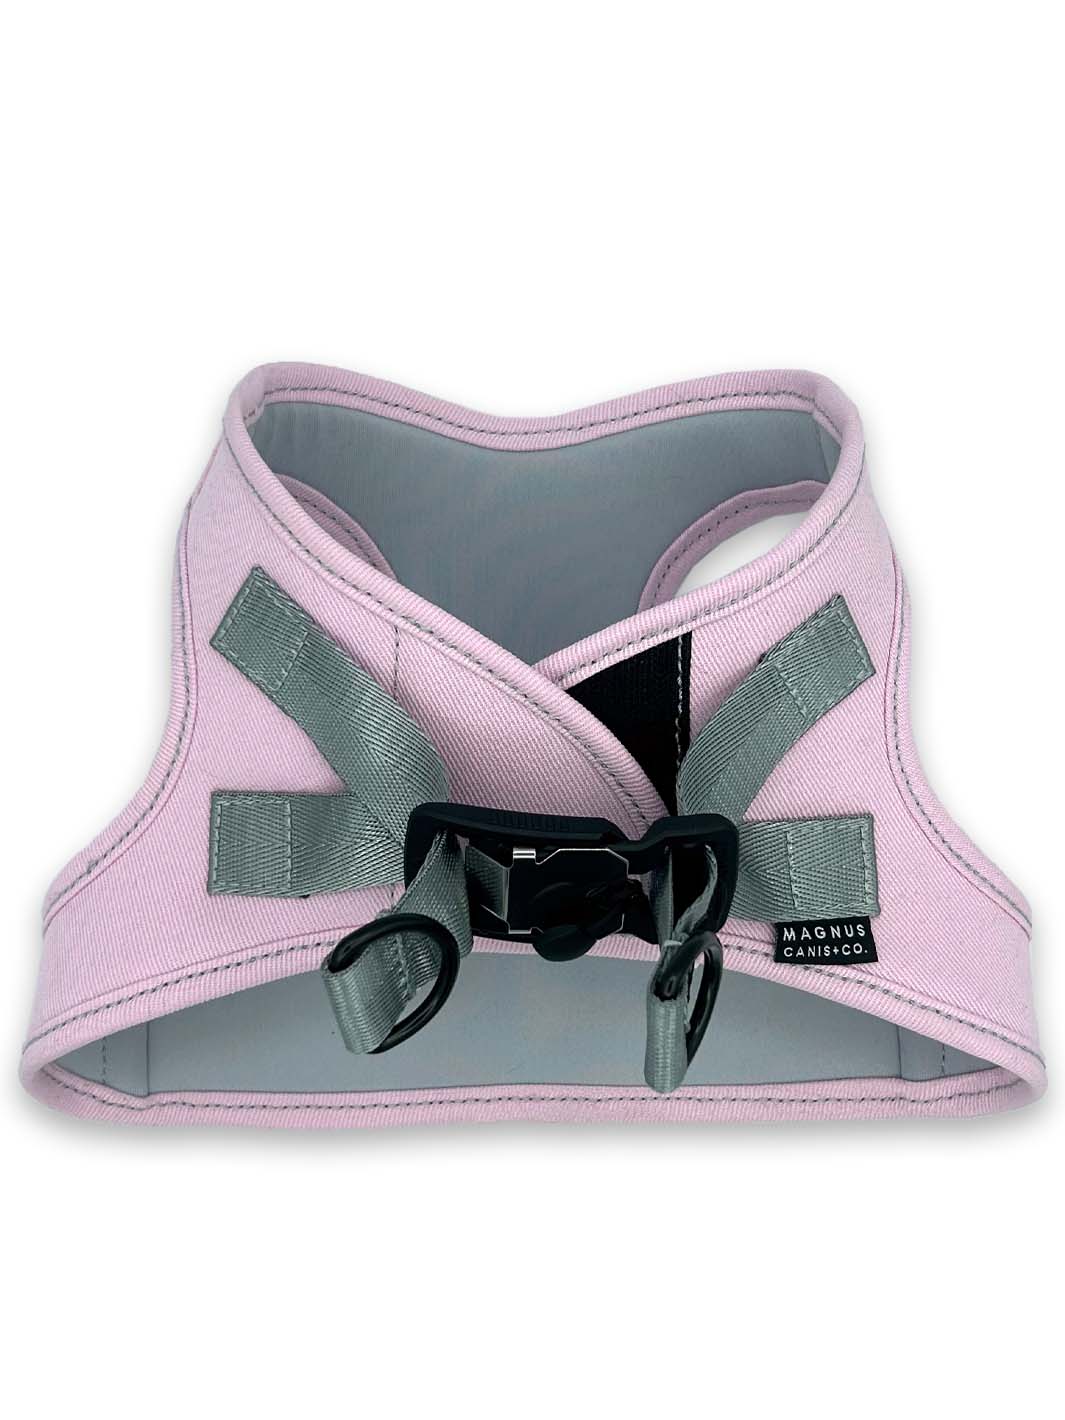 A pale pink made in america denim dog harness laying on a white surface.